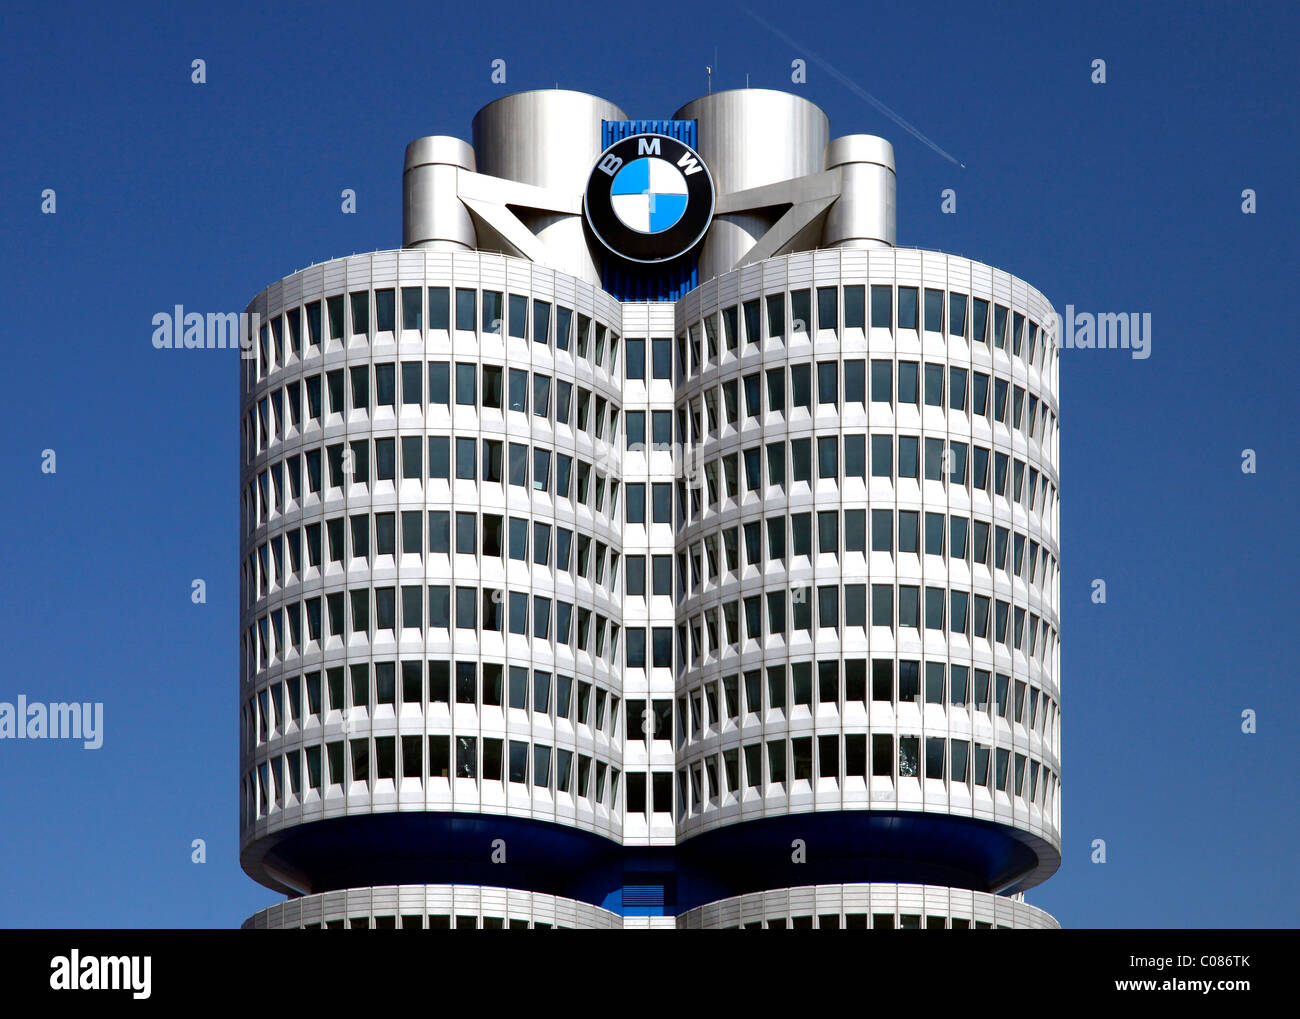 Bmw High Rise Building Headquarters Of The Bavarian Motor Works Stock Photo Alamy